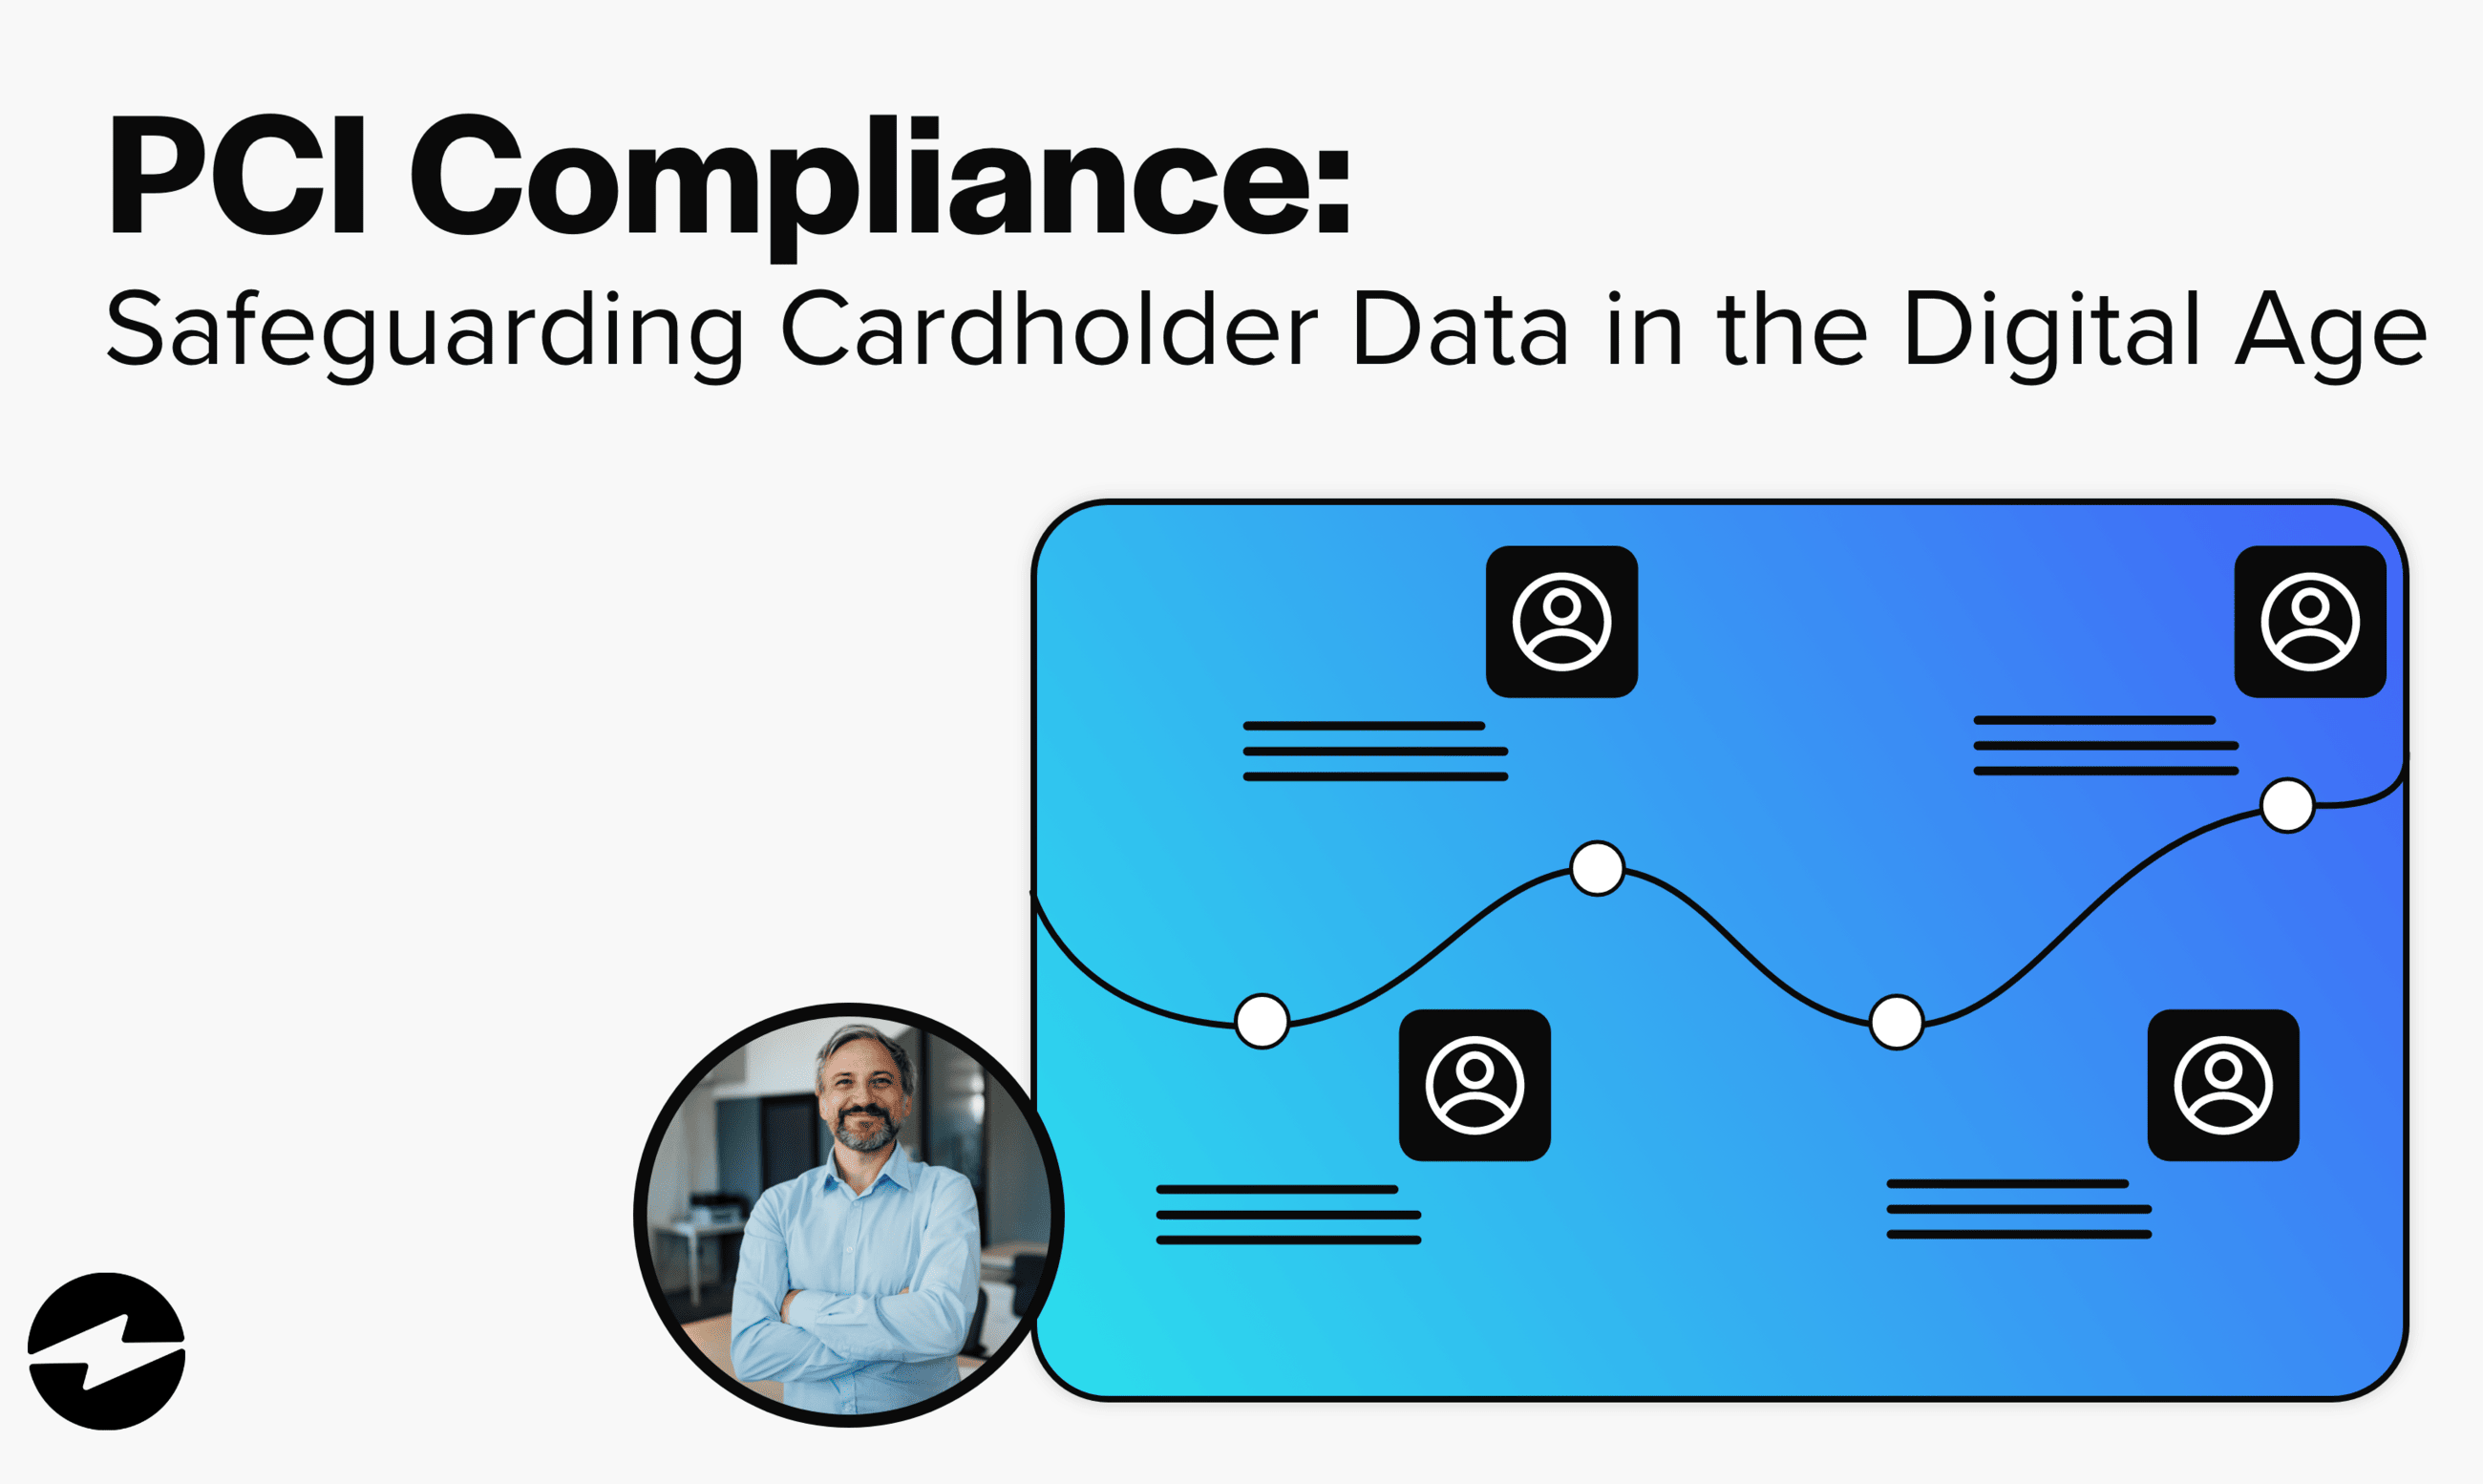 Cardholder data and its role in PCI compliance